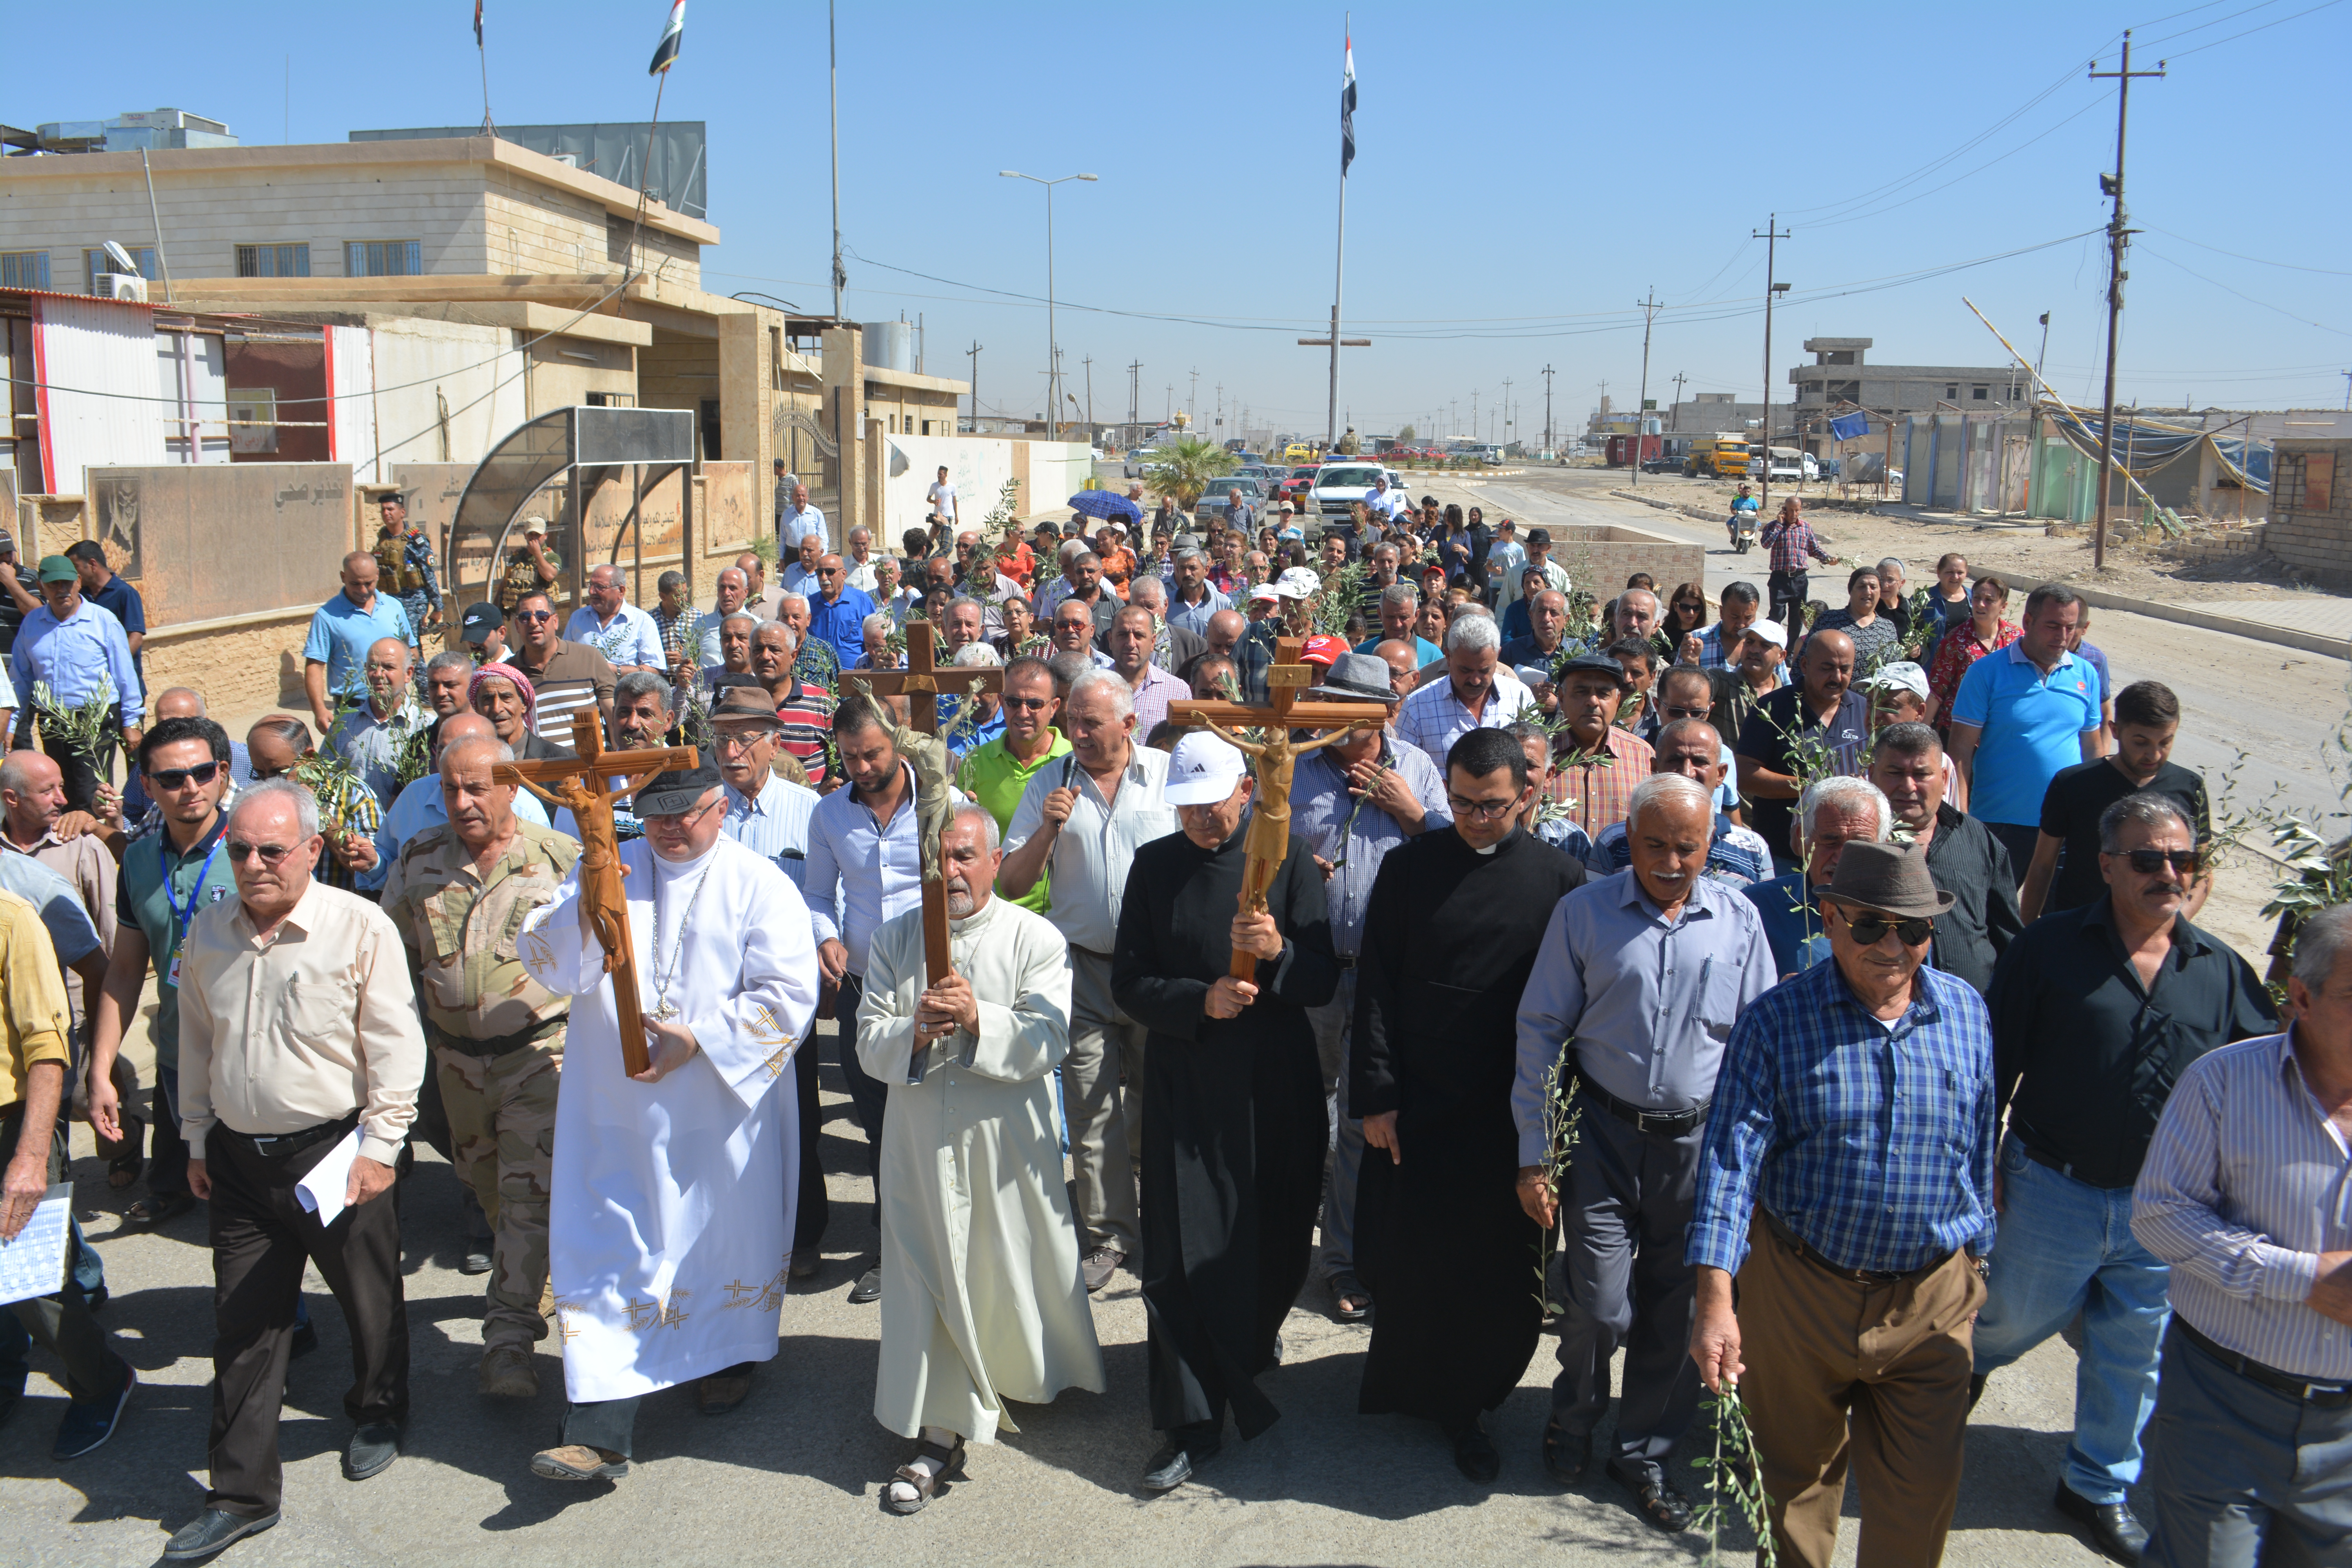 Trip to Iraq of Fr. Andrzej Halemba and John Pontifex September 2017
Priests holding crucifixes lead Christians waving olive branches through the streets of Qaraqosh (Baghdeda)